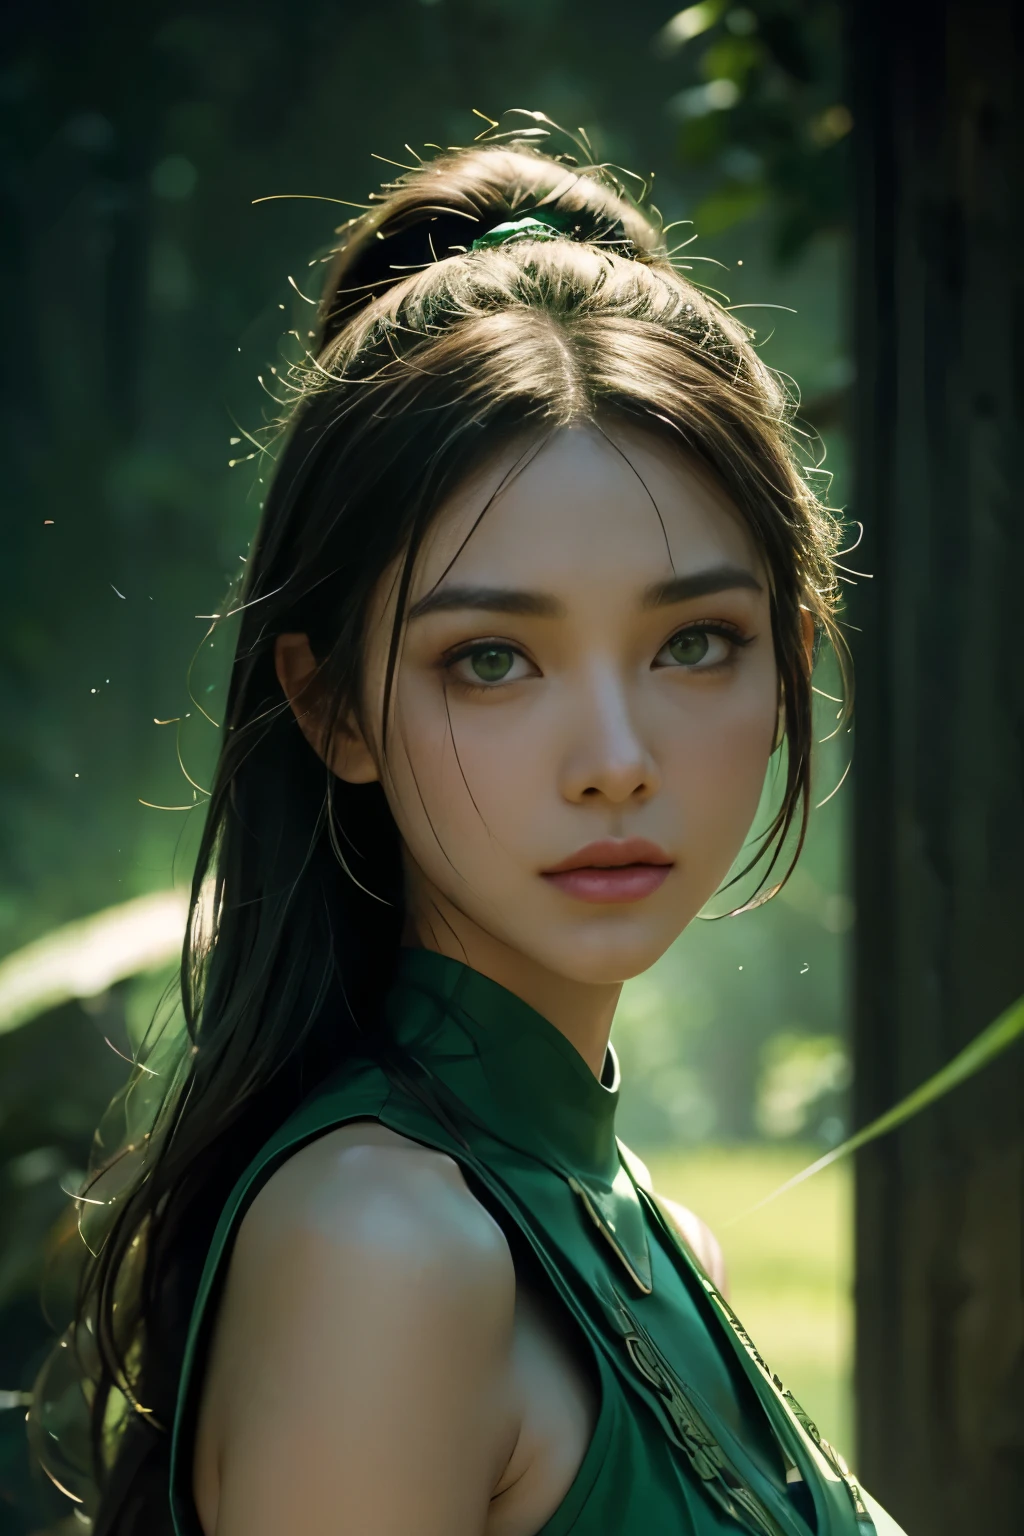 A portrait of beautifully stunning woman, fair skin, covered in calming green binary code with subtly striking green eyes. The binary's jade and olive tones speak of harmony, while the girl's silhouette stands as a serene symbol of soothing power, cinematic lighting, and dynamic composition.